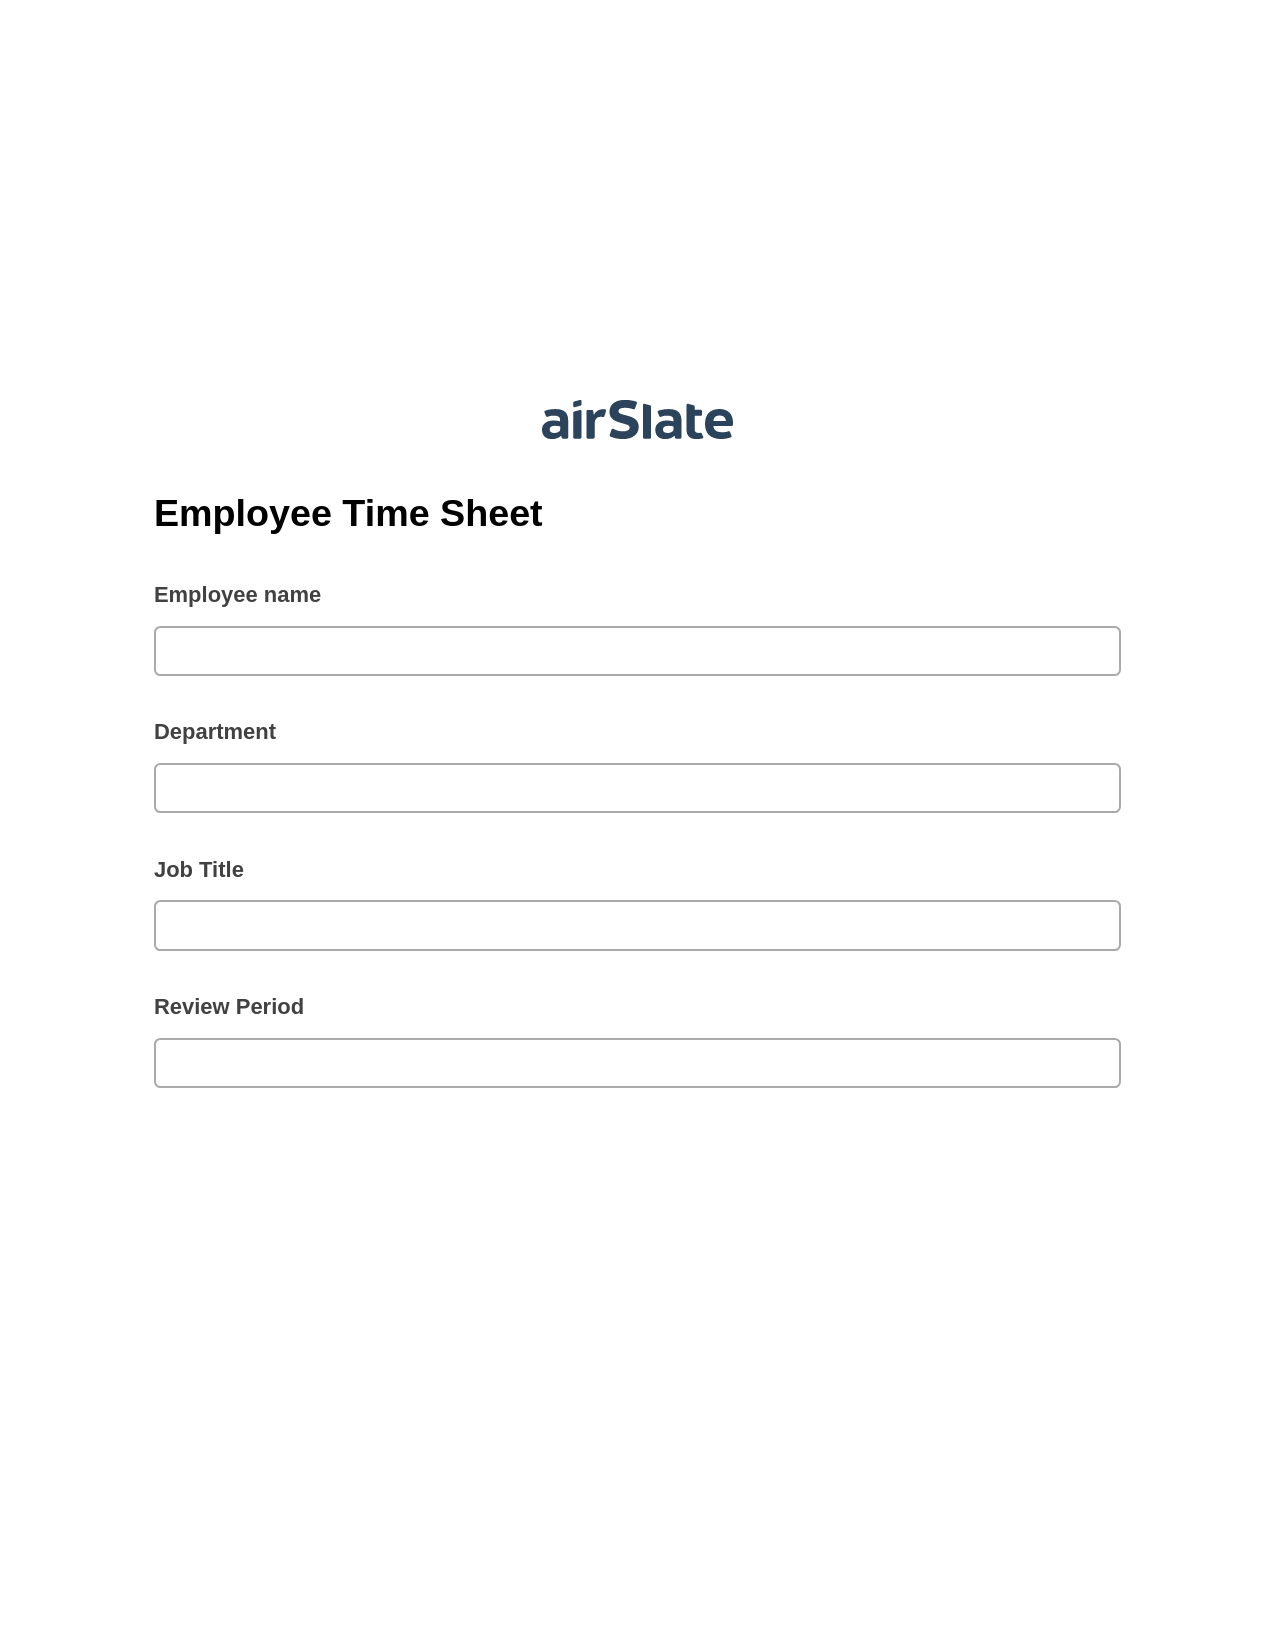 Employee Time Sheet Pre-fill Dropdowns from CSV file Bot, Create Salesforce Records Bot, Export to Salesforce Record Bot